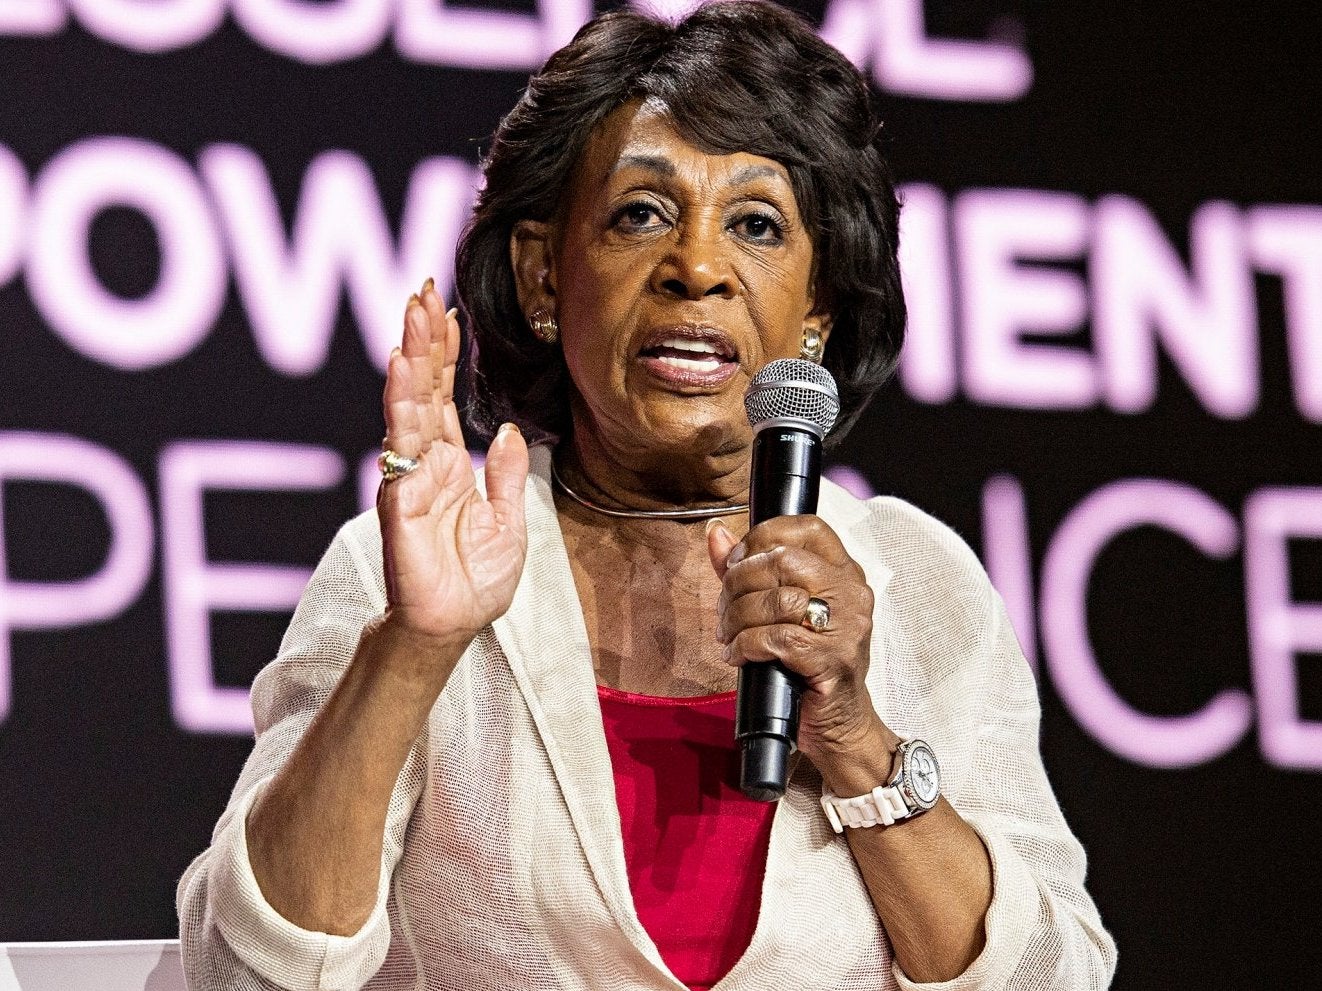 Maxine Waters has called for an investigation into the events on 6 January 2021 on Capitol Hill